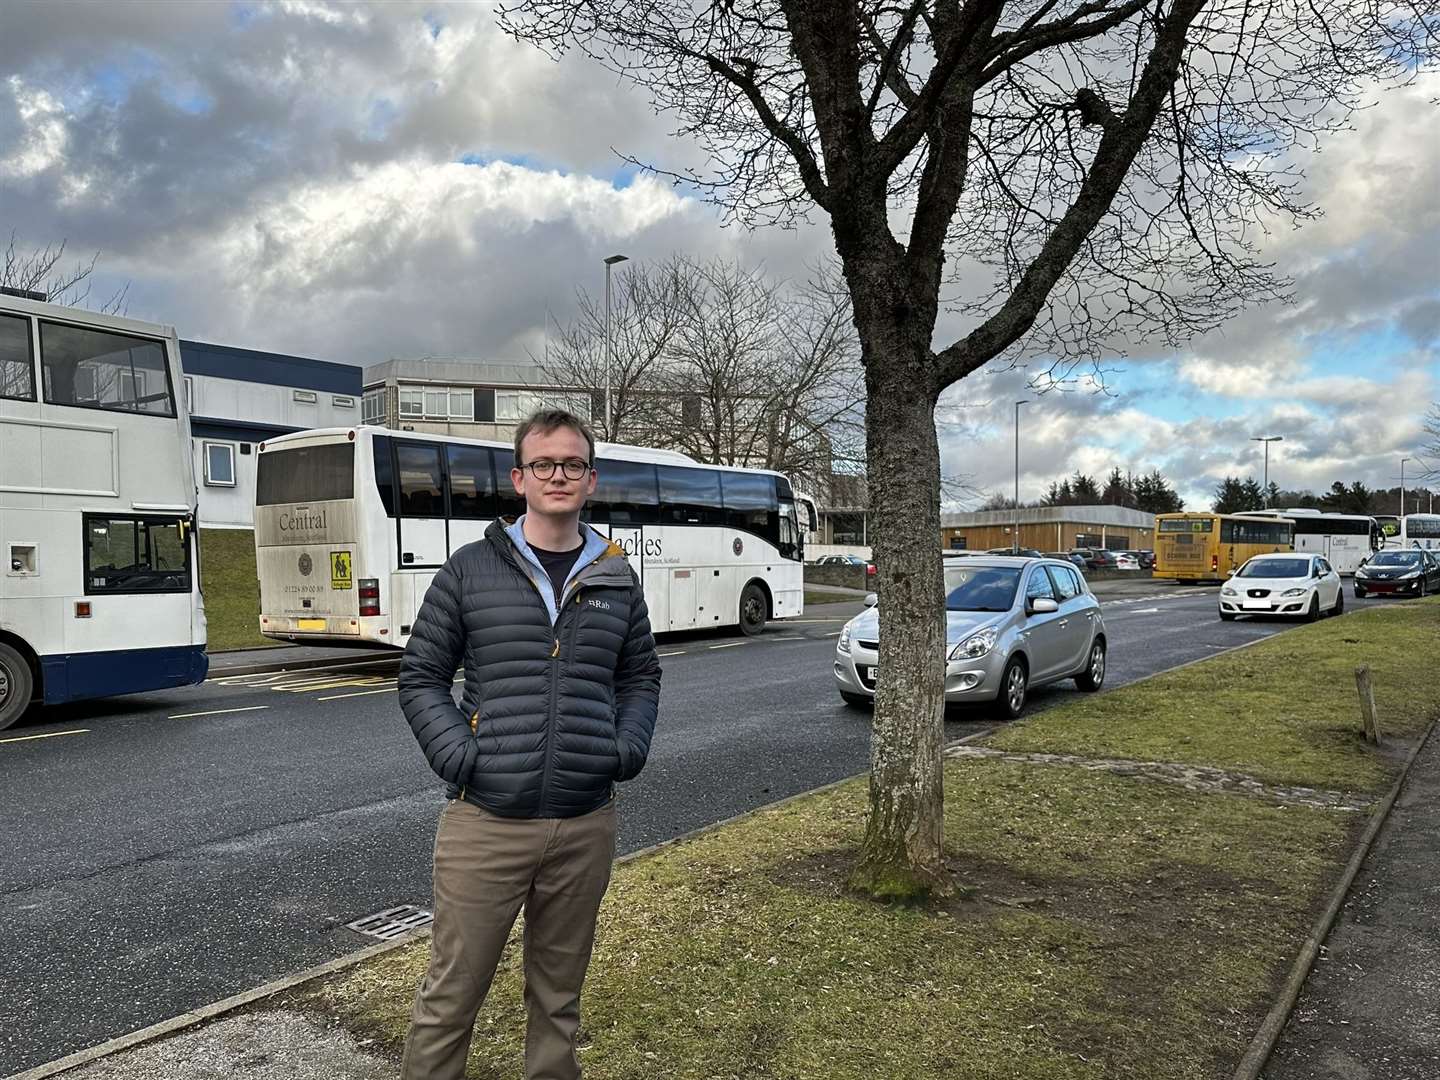 Councillor Sam Payne has welcomed the upgrade of bus parking.